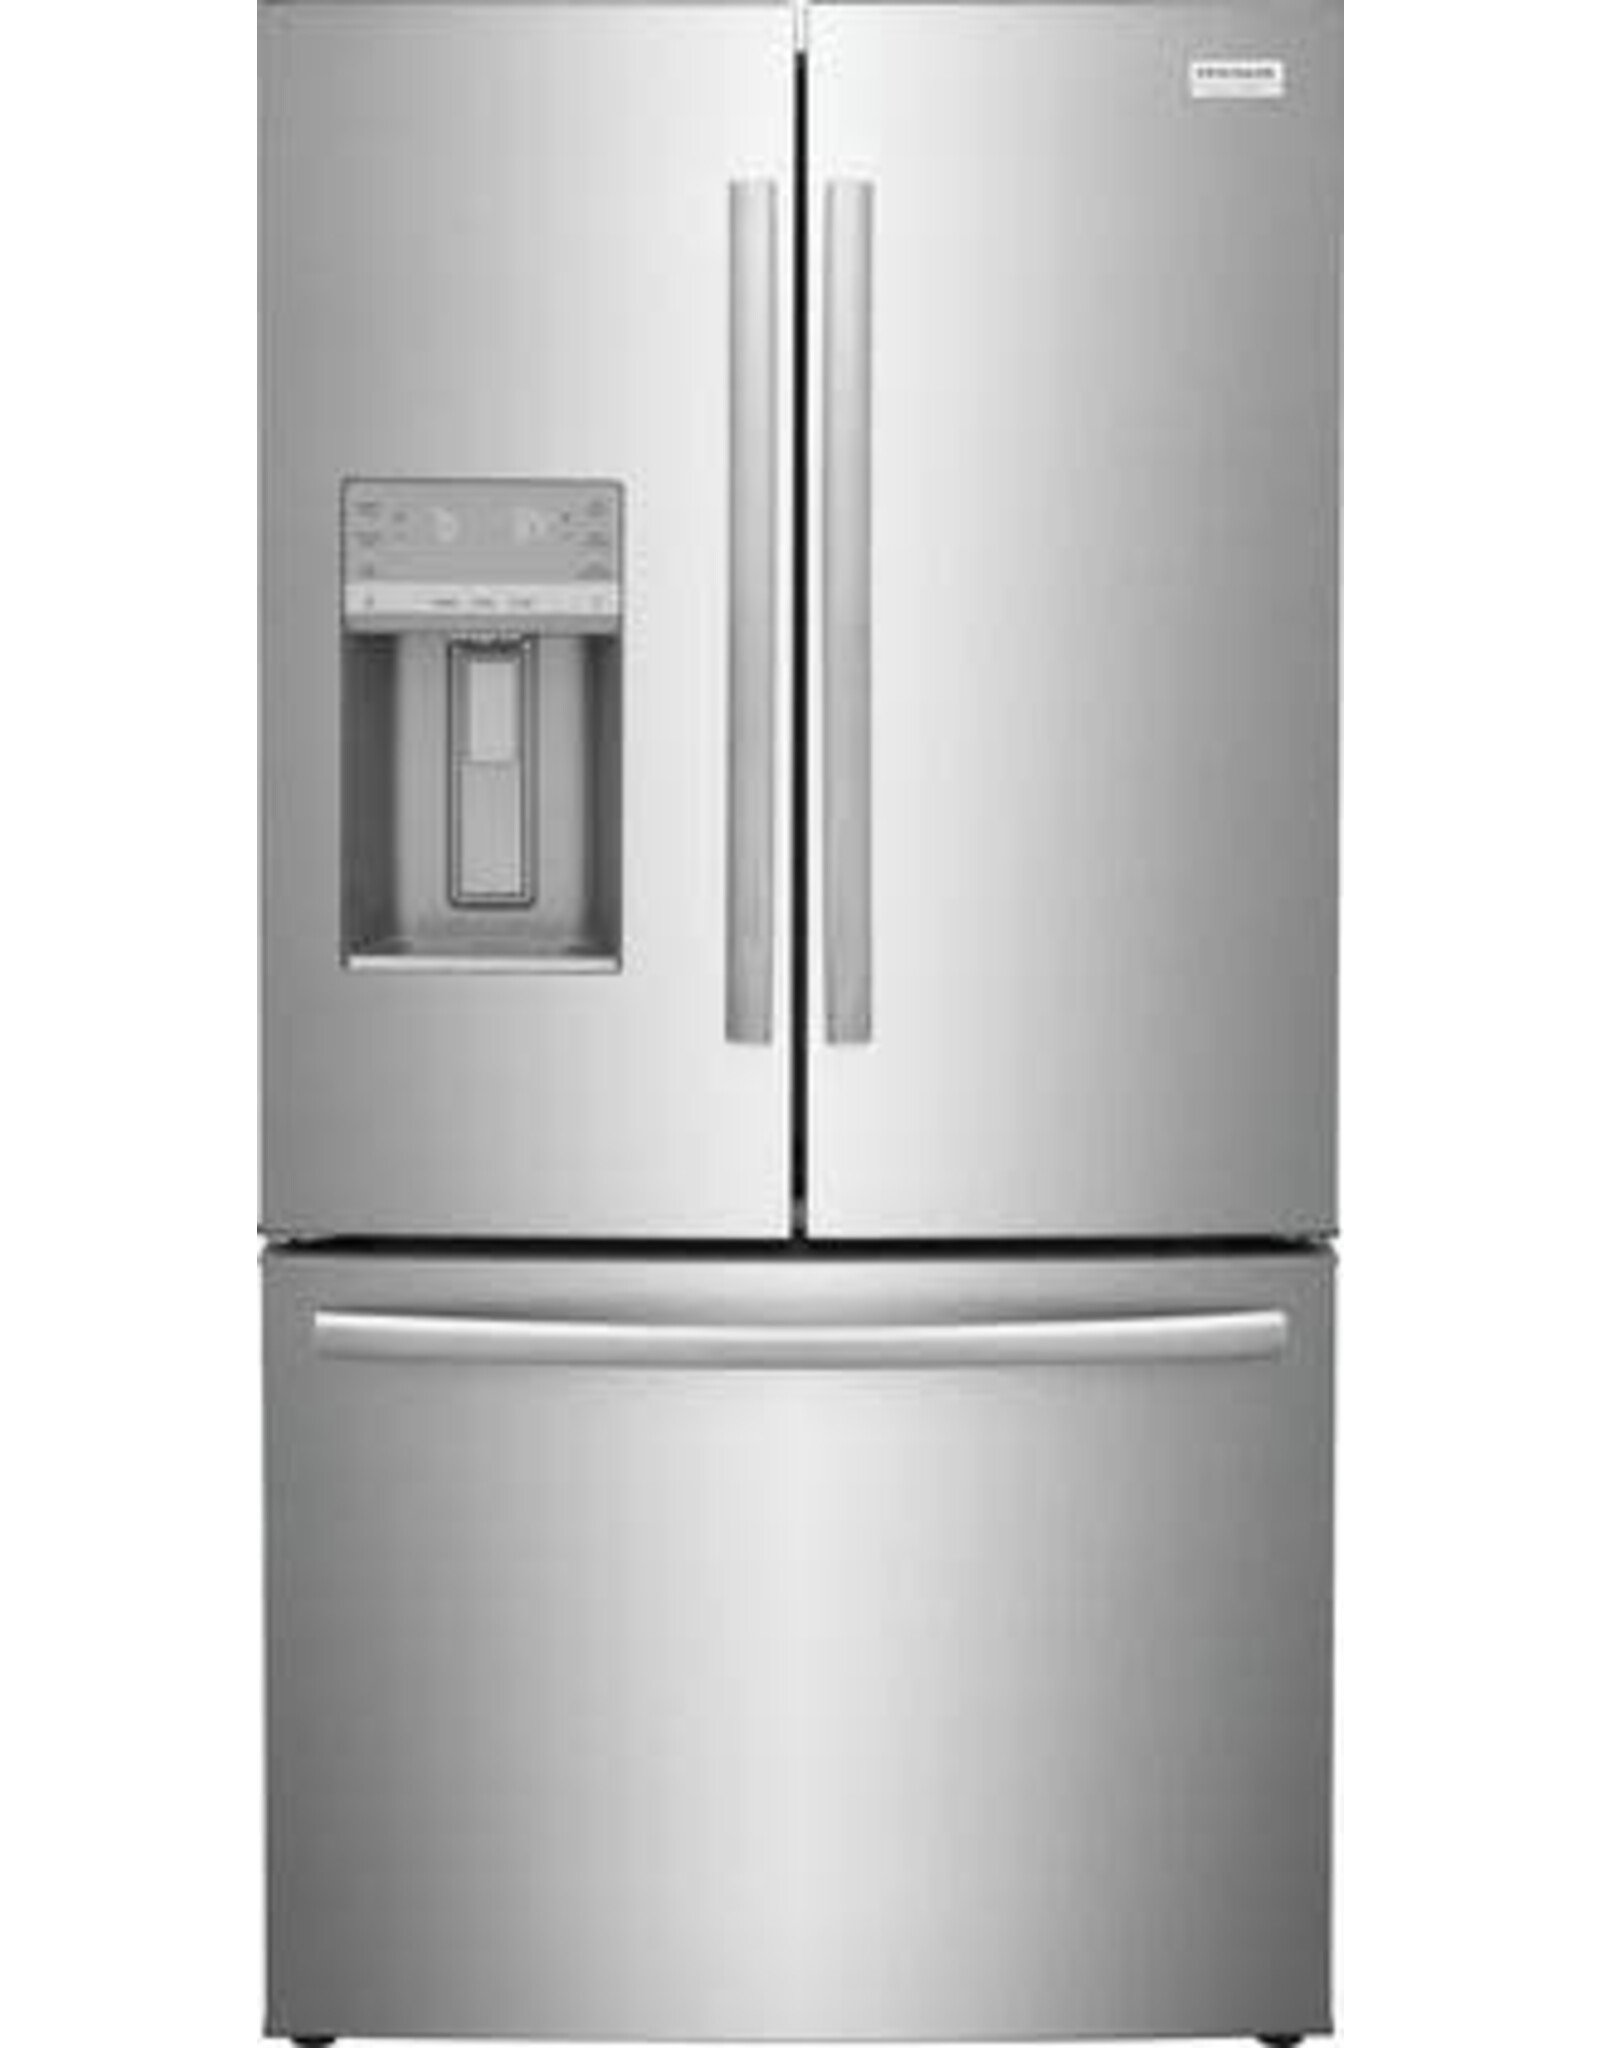 FRIGIDAIRE FRFS282LAF FRIGIDAIRE 27.8 cu. ft. French Door Refrigerator in Smudge-Proof Stainless Steel